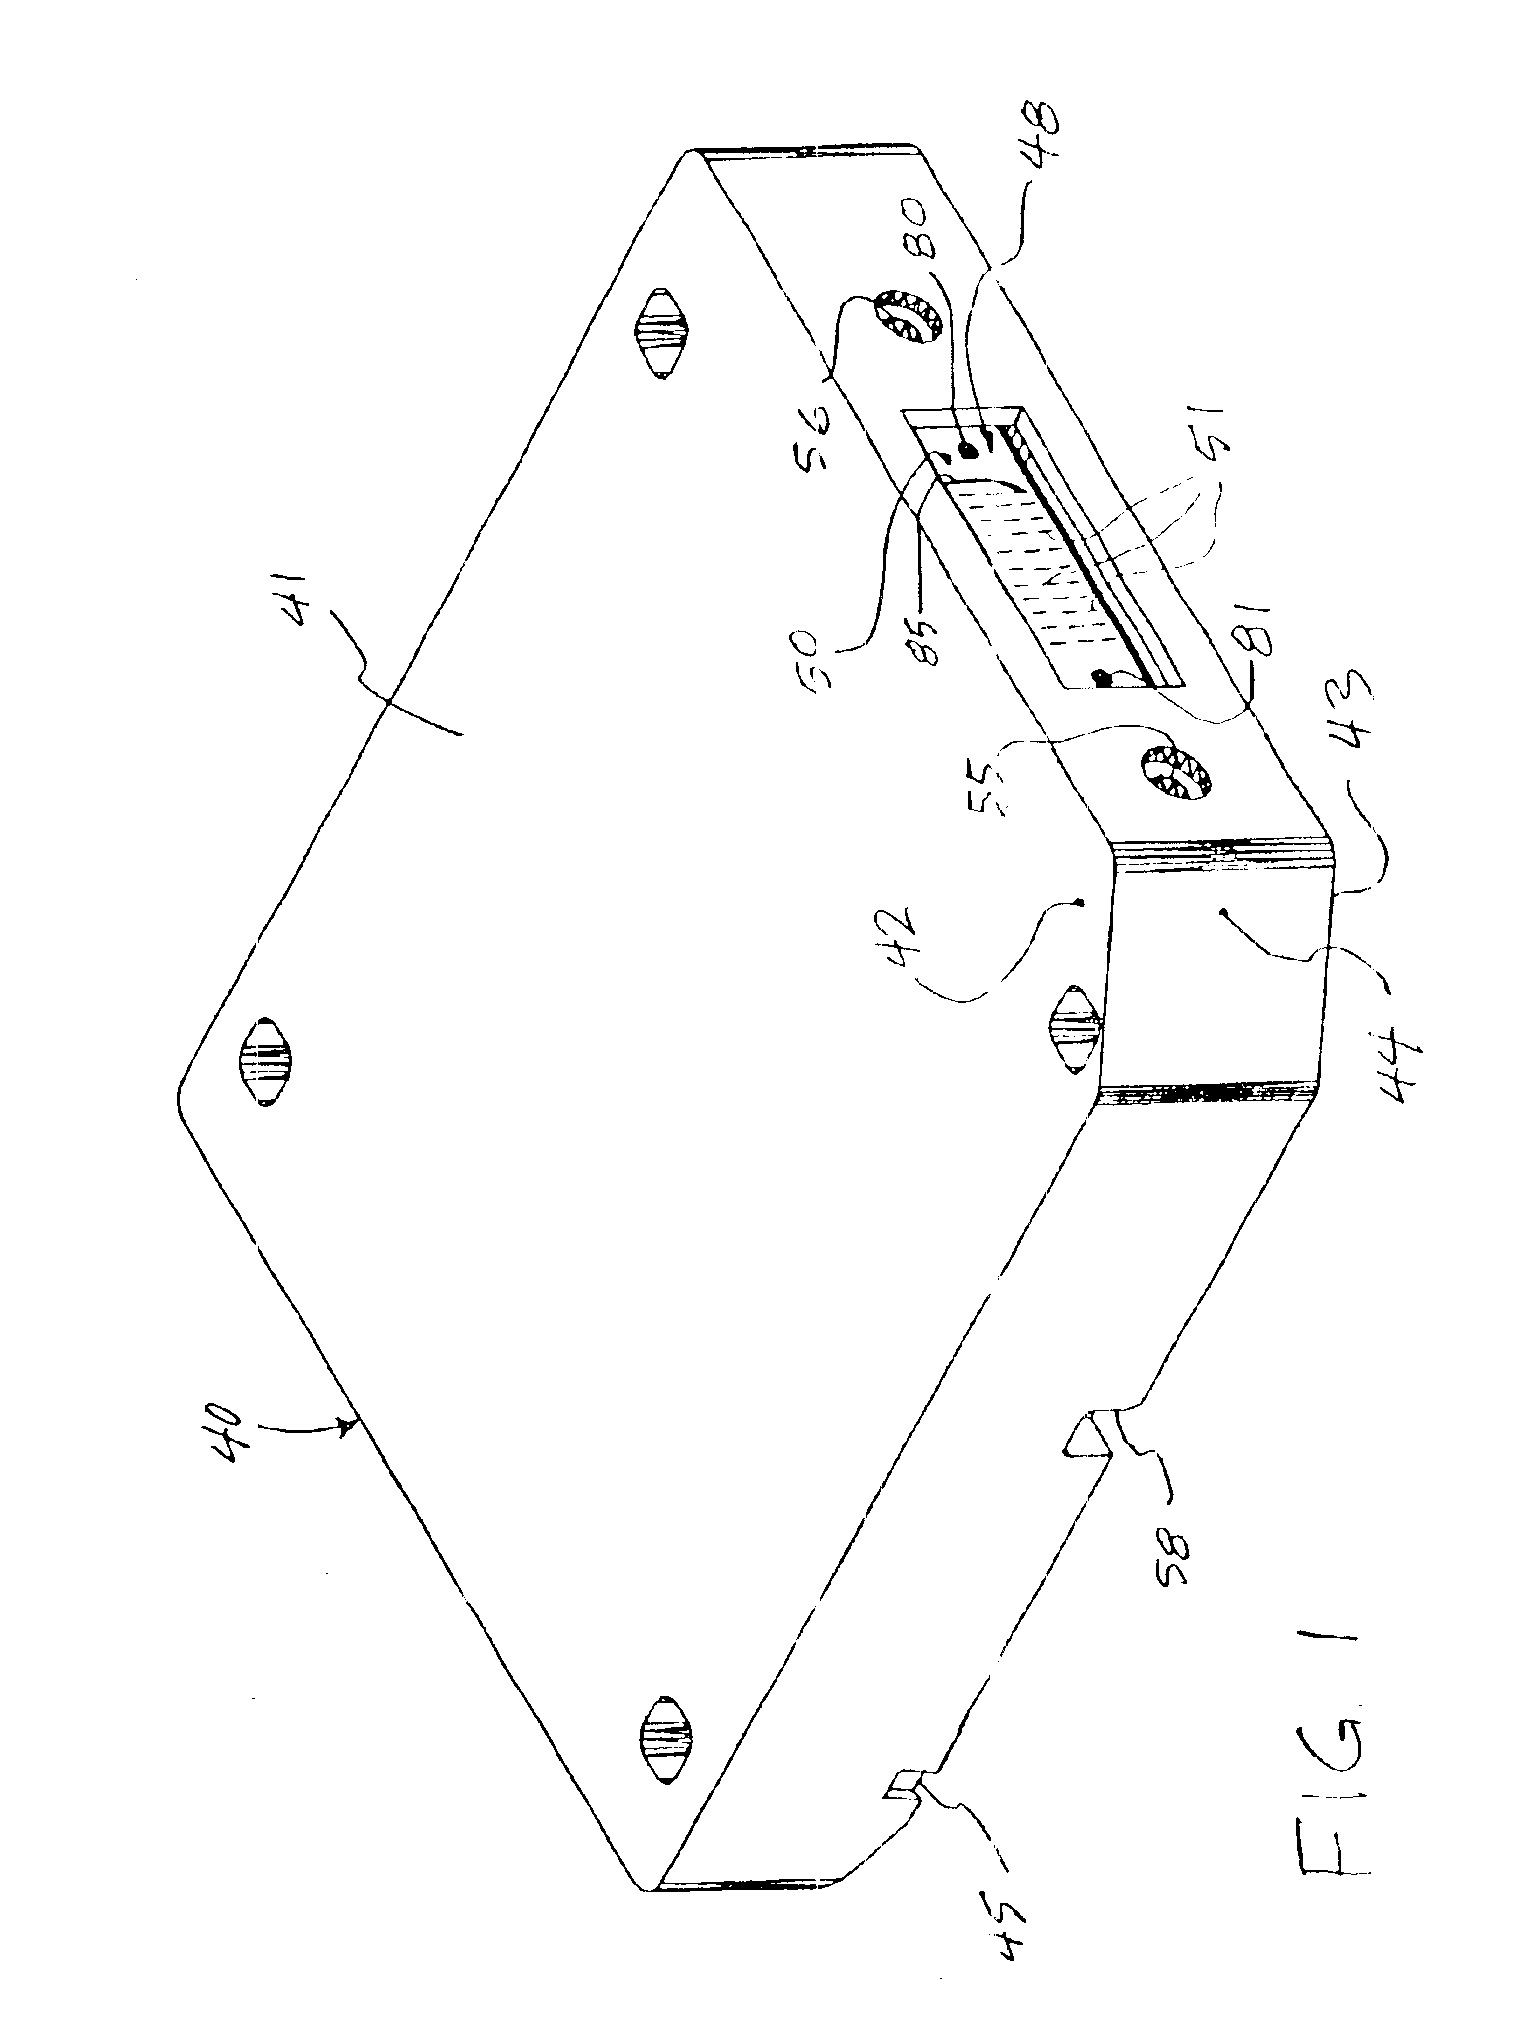 Releasable, repeatable electrical connection employing compression